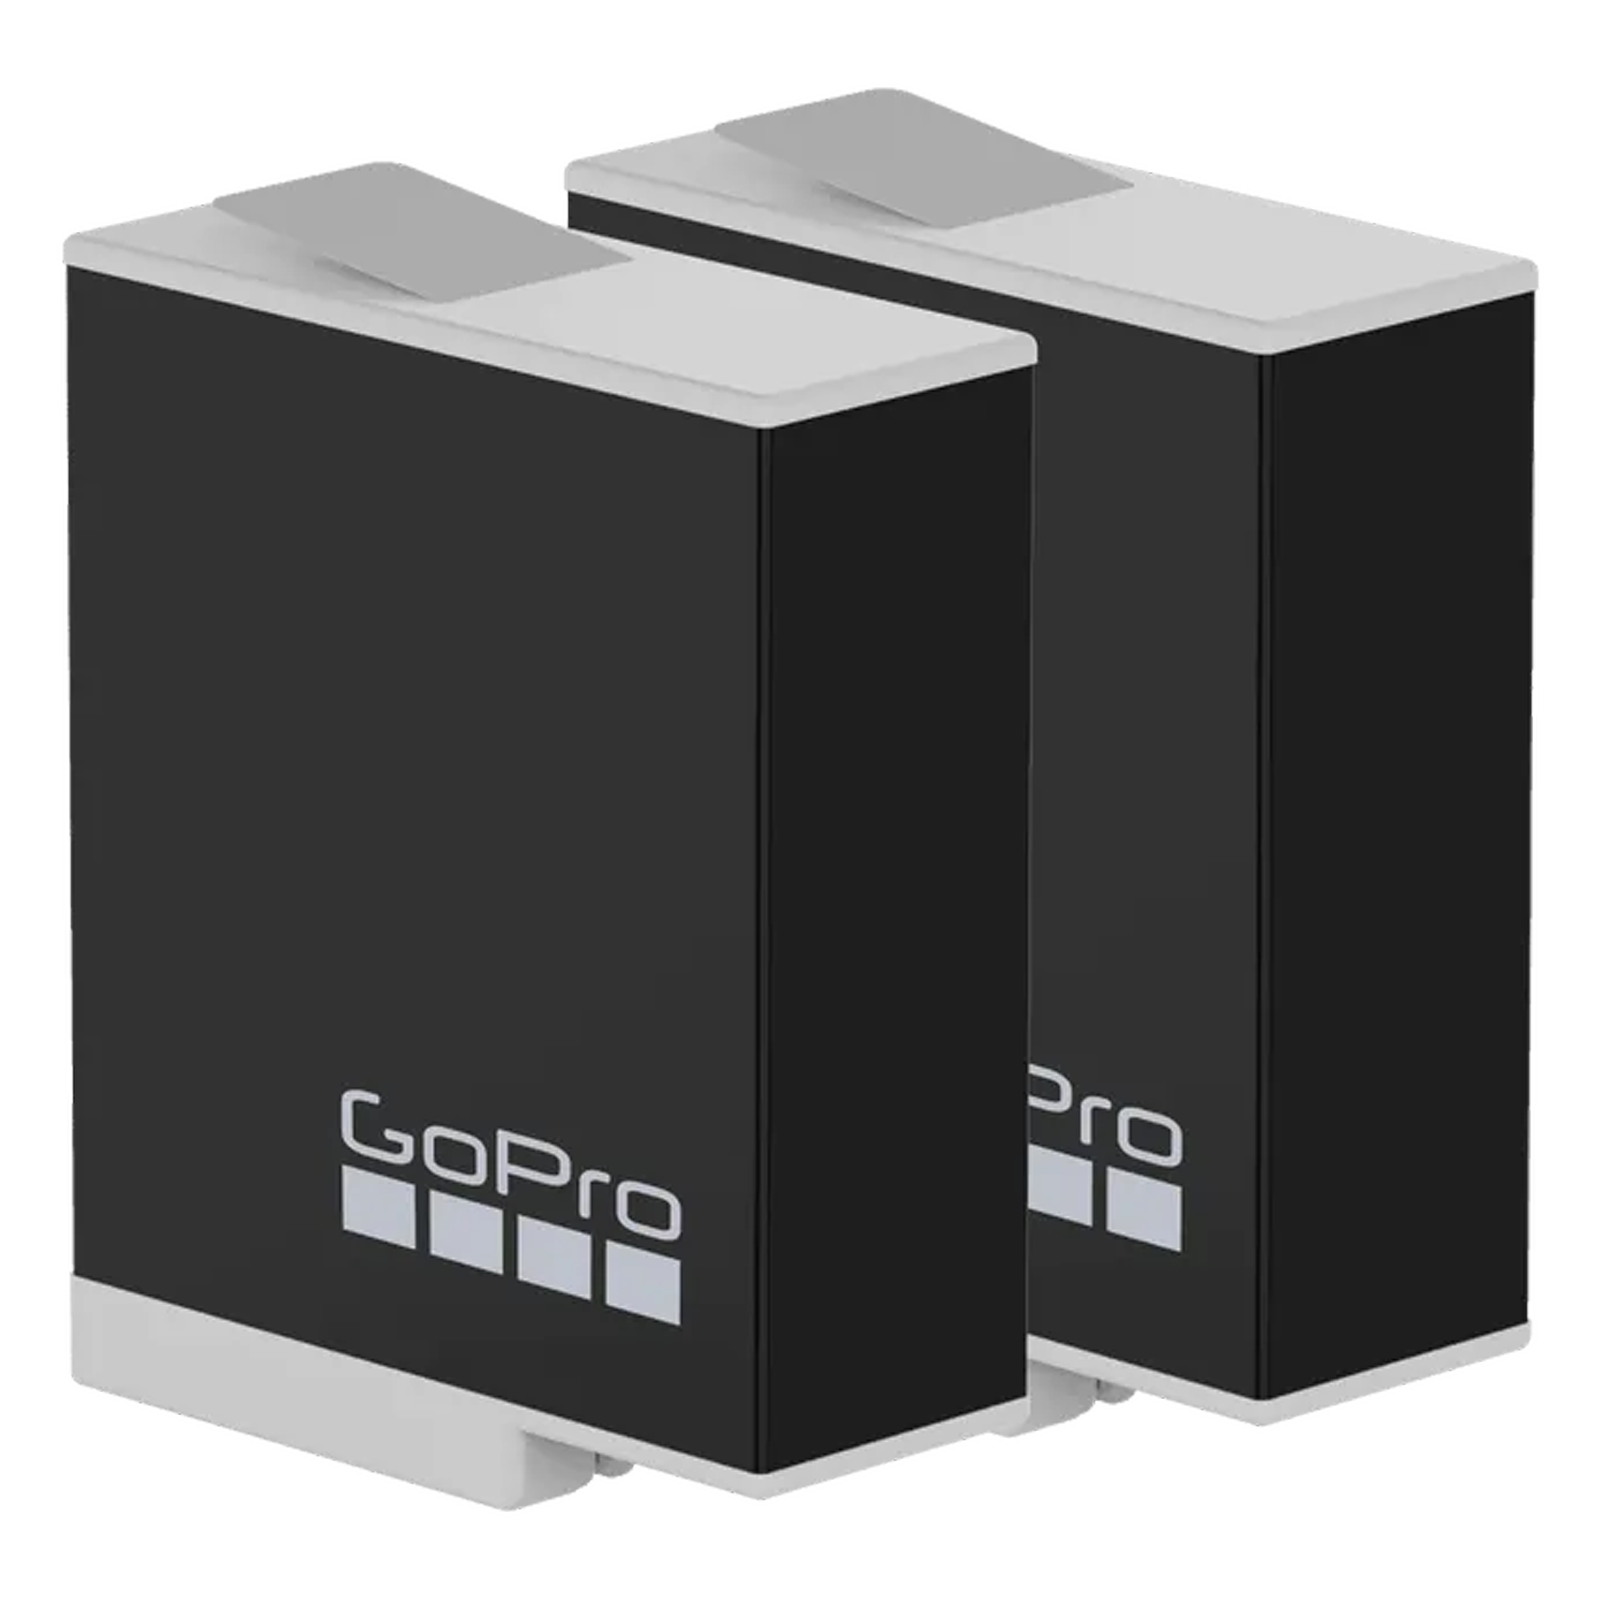 GoPro Enduro 1720 mAh Lithium-ion Rechargeable Battery (Pack of 2)